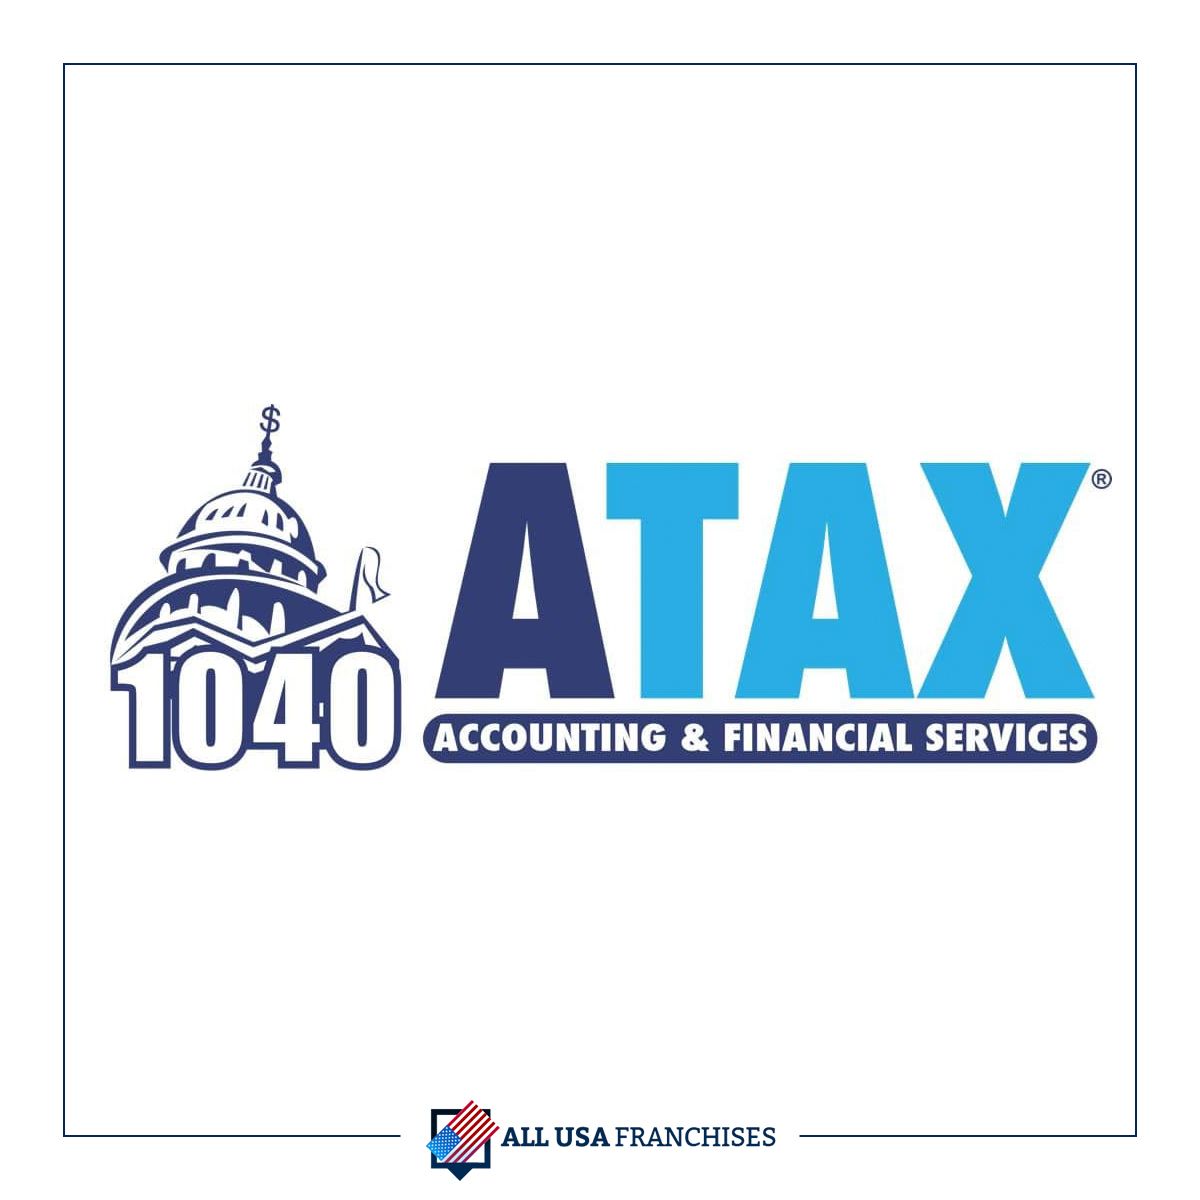 Atax accounting and financial services